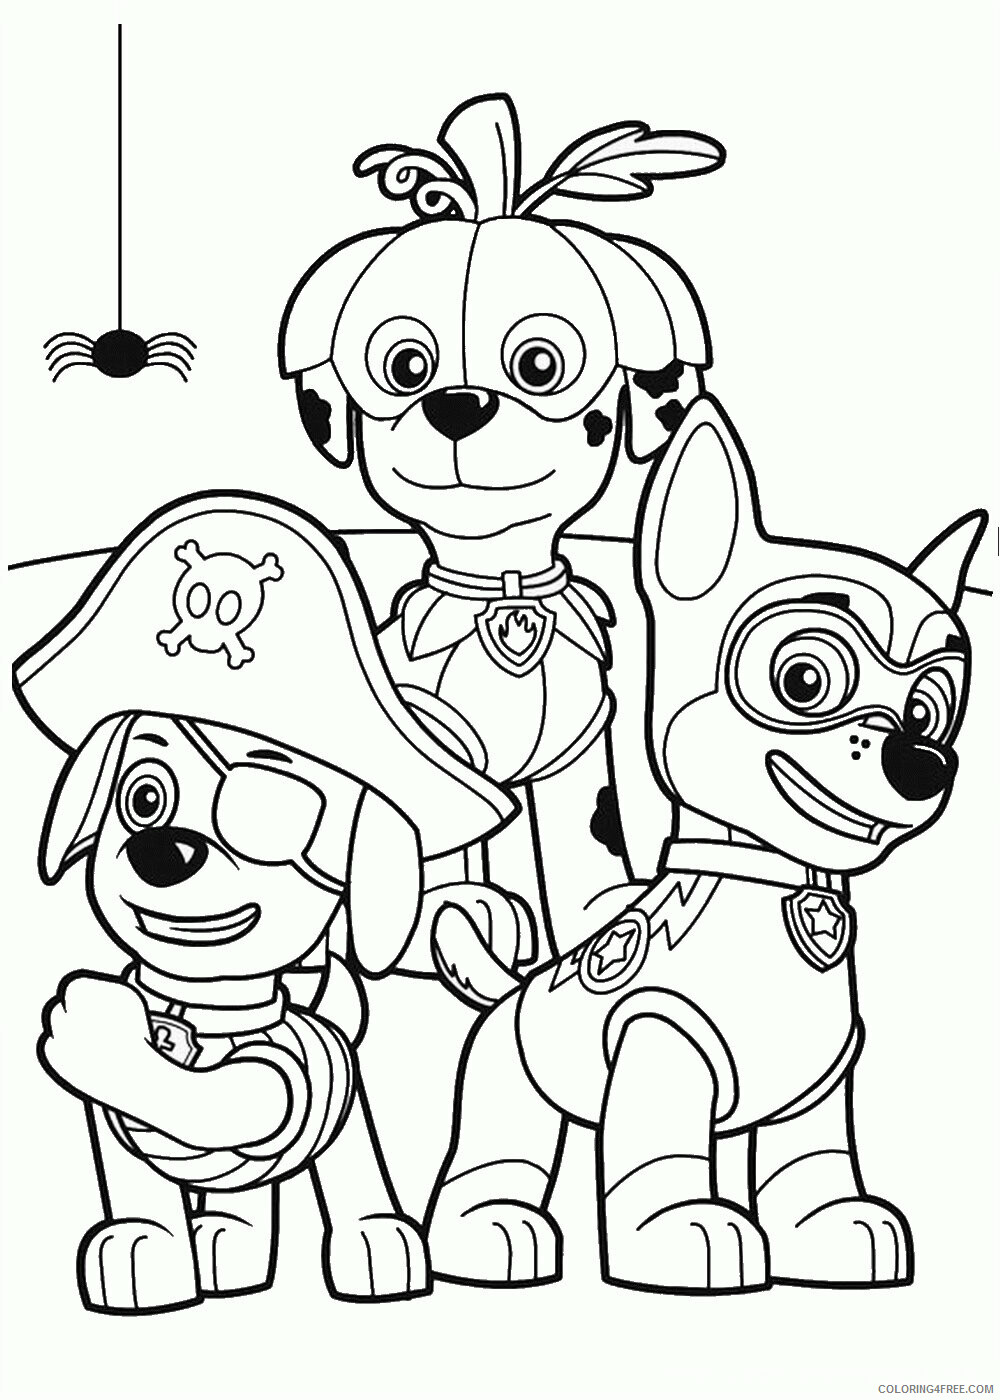 Puppy Coloring Sheets Animal Coloring Pages Printable 2021 3568 Coloring4free